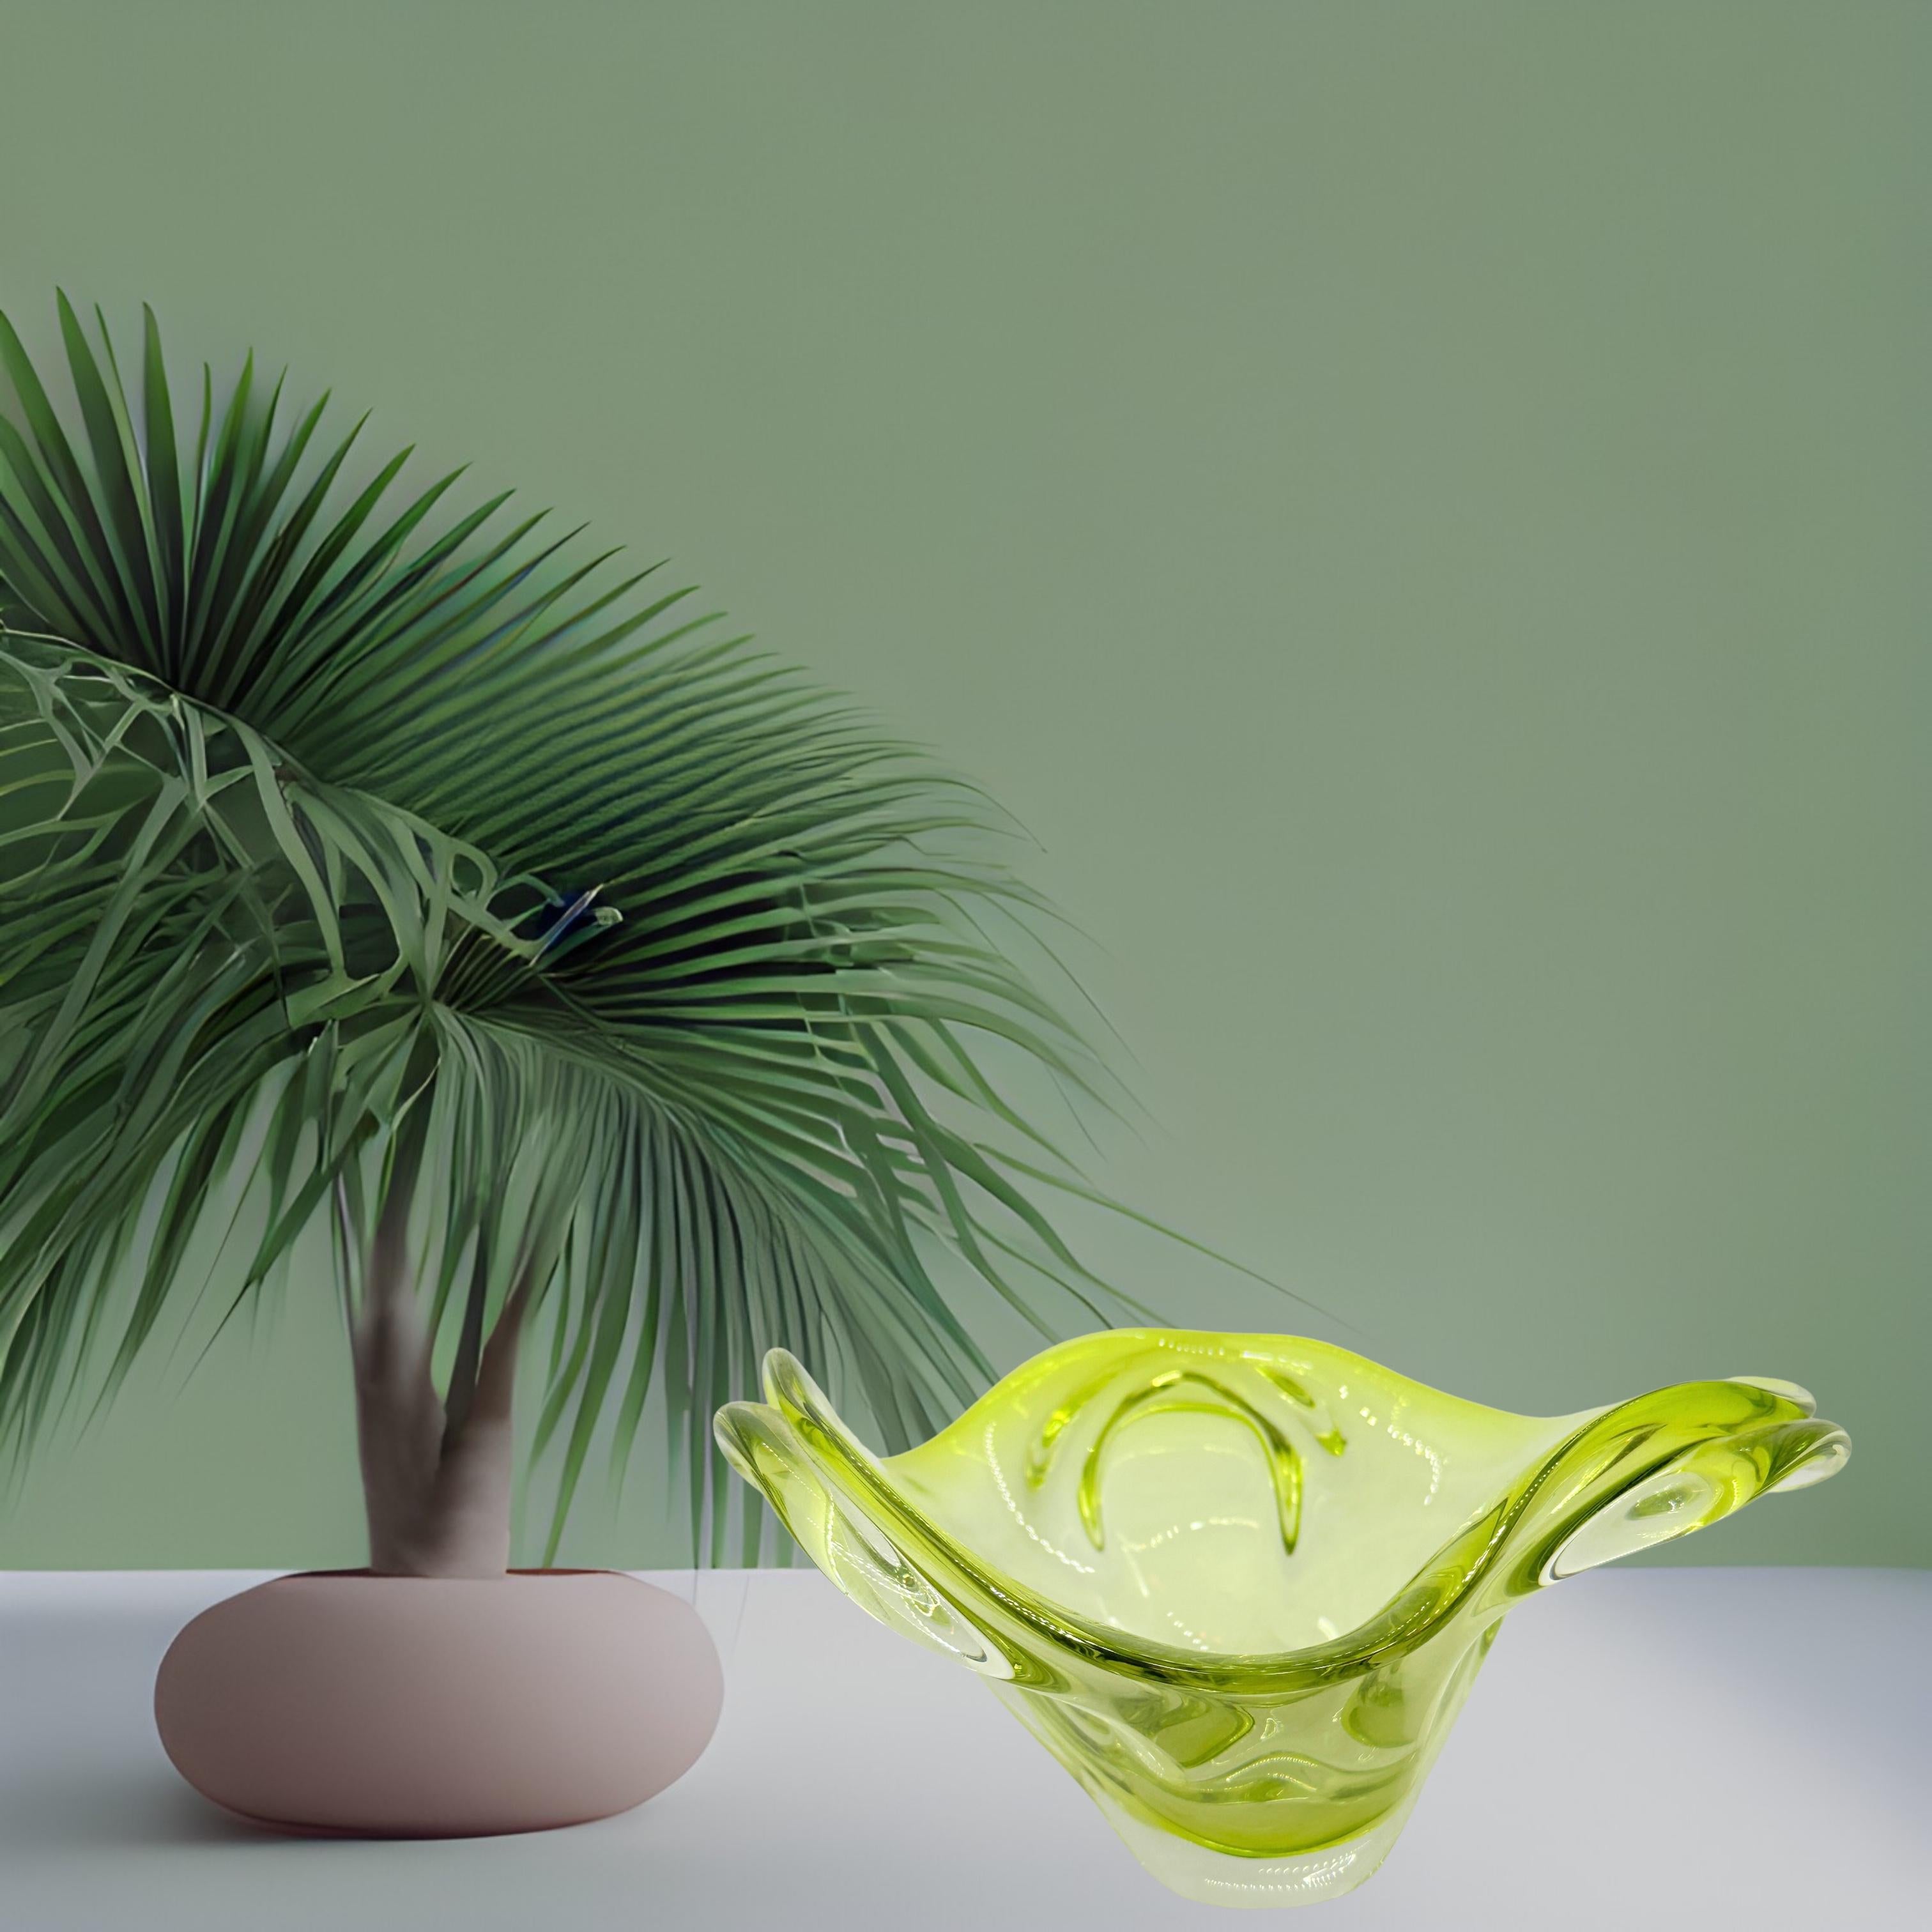 Gorgeous hand blown Murano art glass piece with Sommerso and bullicante techniques. A beautiful organic shaped bowl, catchall or centrepiece, Venice, Murano, Italy, 1970s. Colors are a lime green and clear. A nice addition to any room.